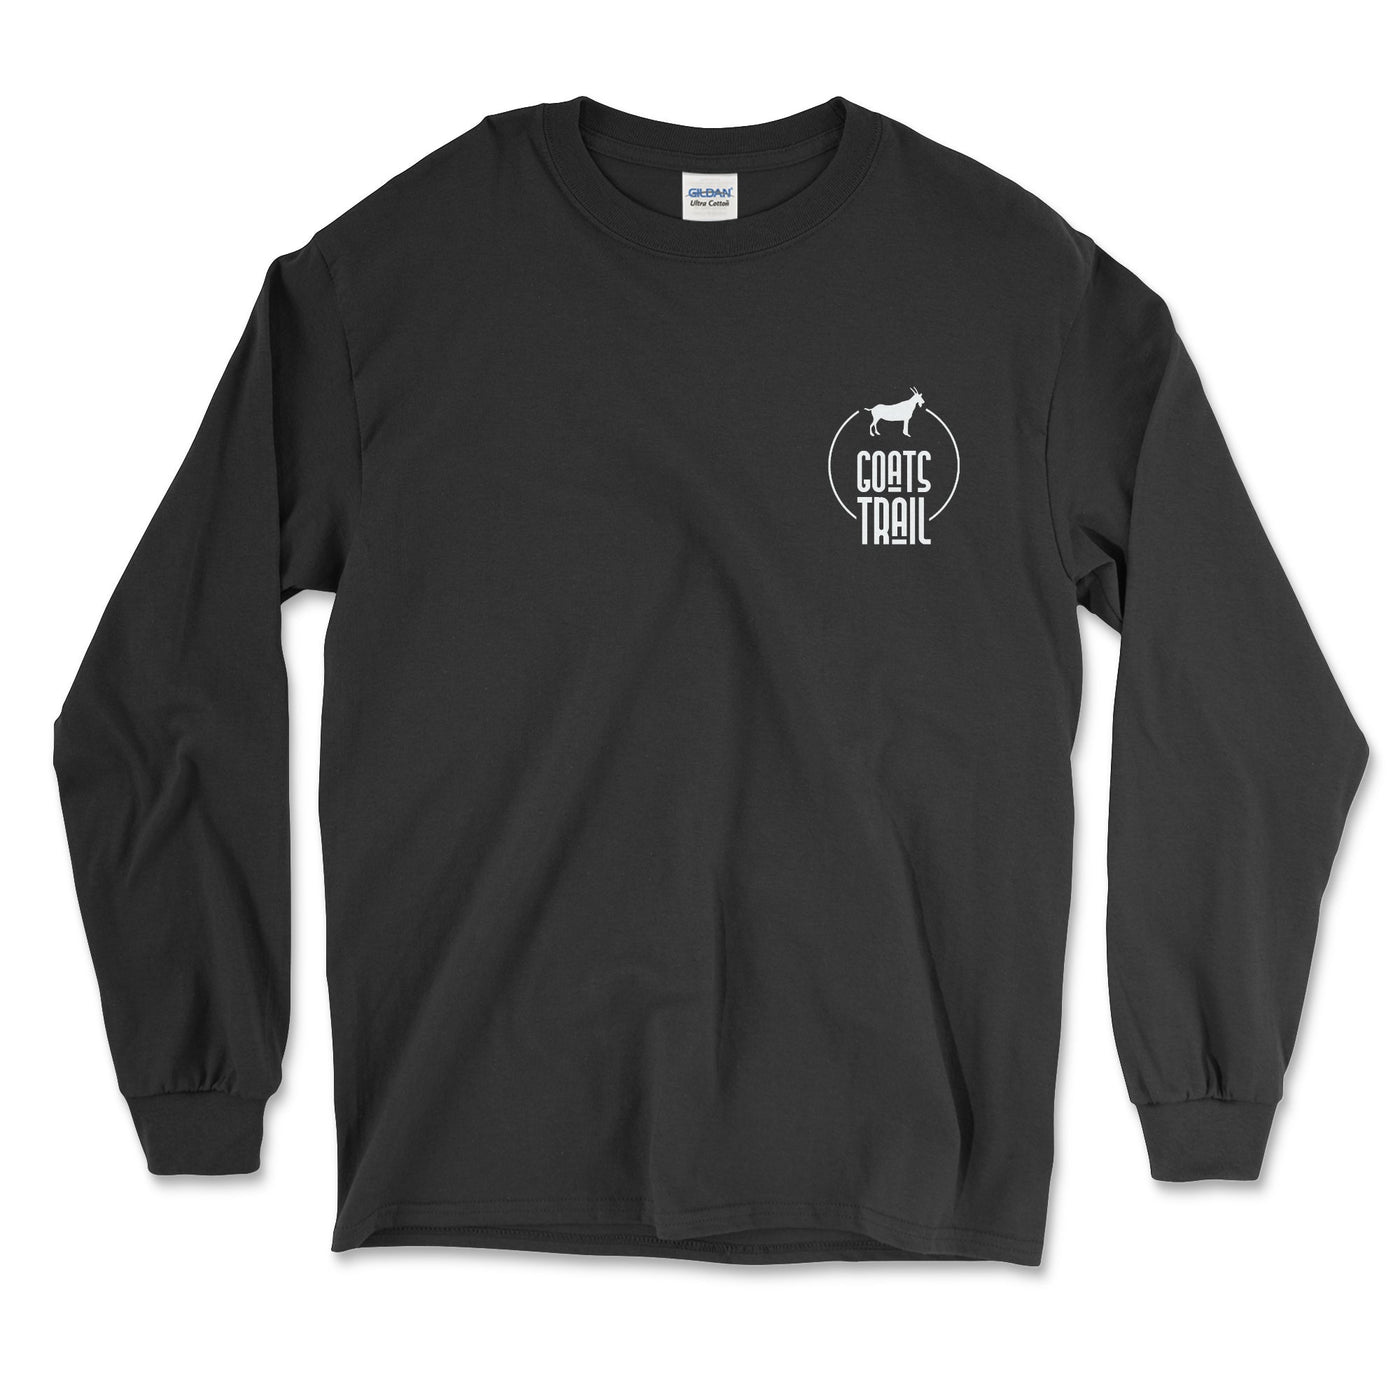 Buckle Up Buttercup Long-Sleeve Shirt - Goats Trail Off-Road Apparel Company